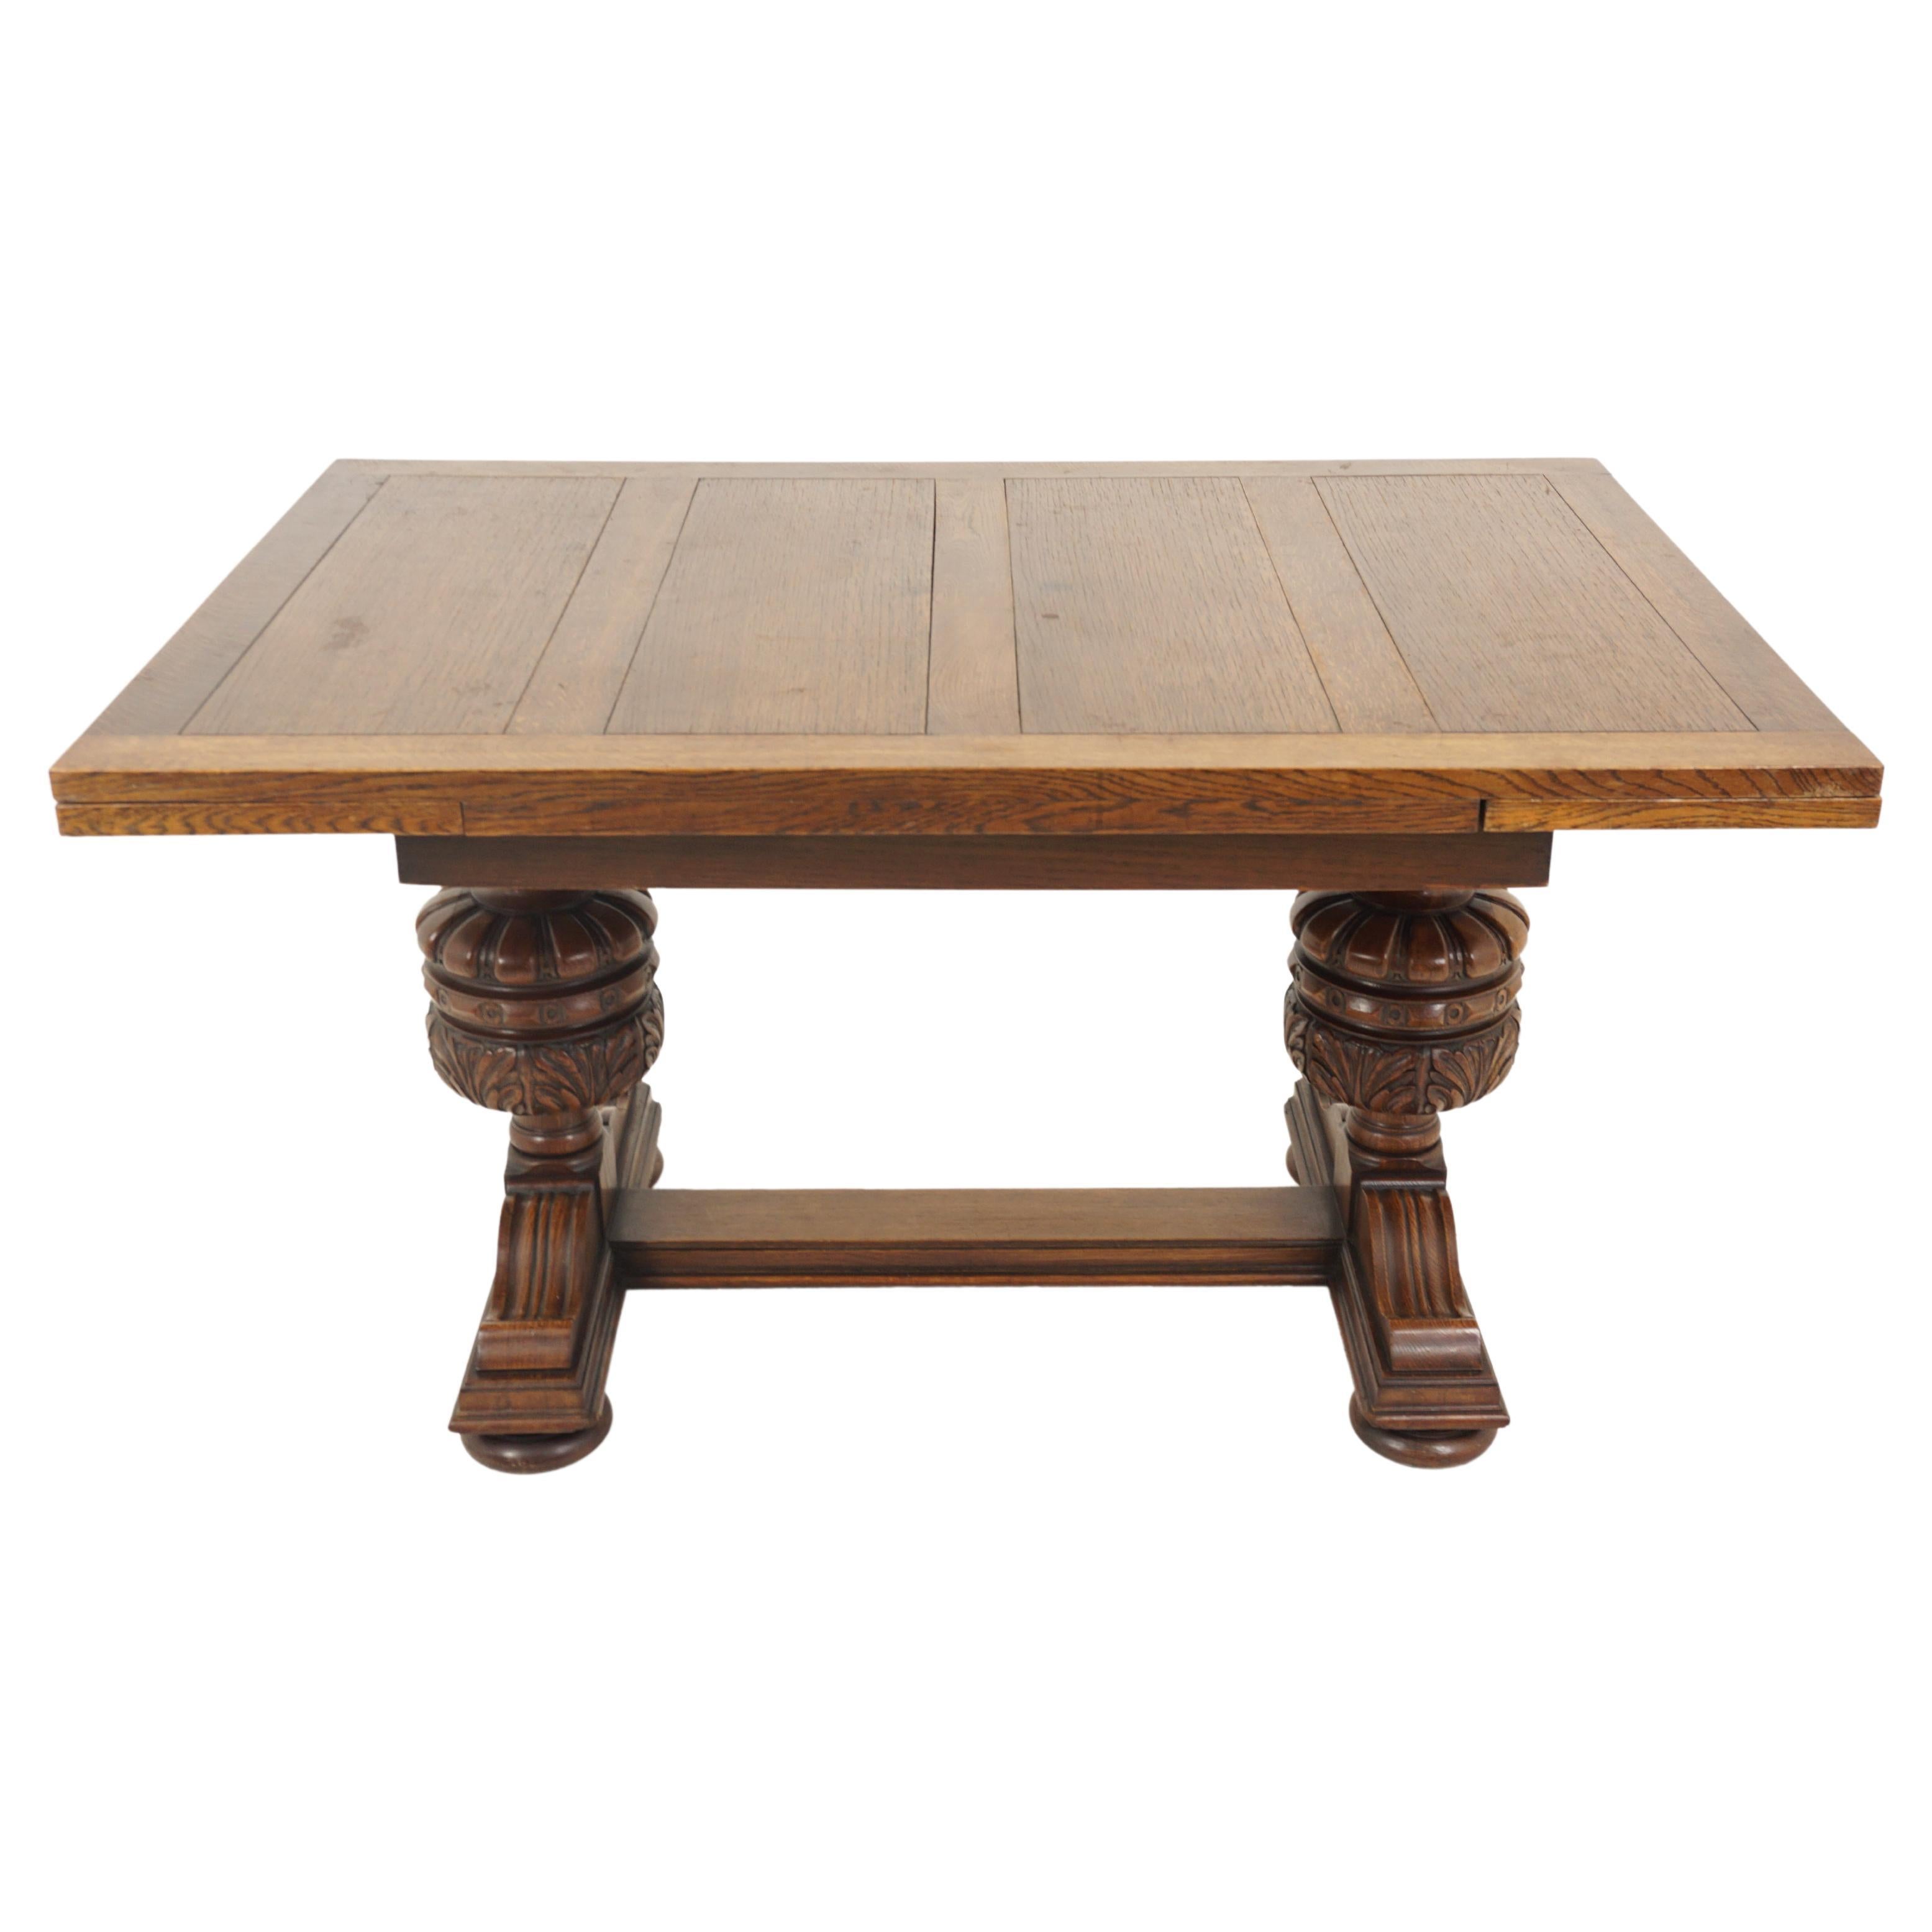 Antique Large Carved Oak Refectory Draw Leaf Dining Table, Scotland 1920, B2626